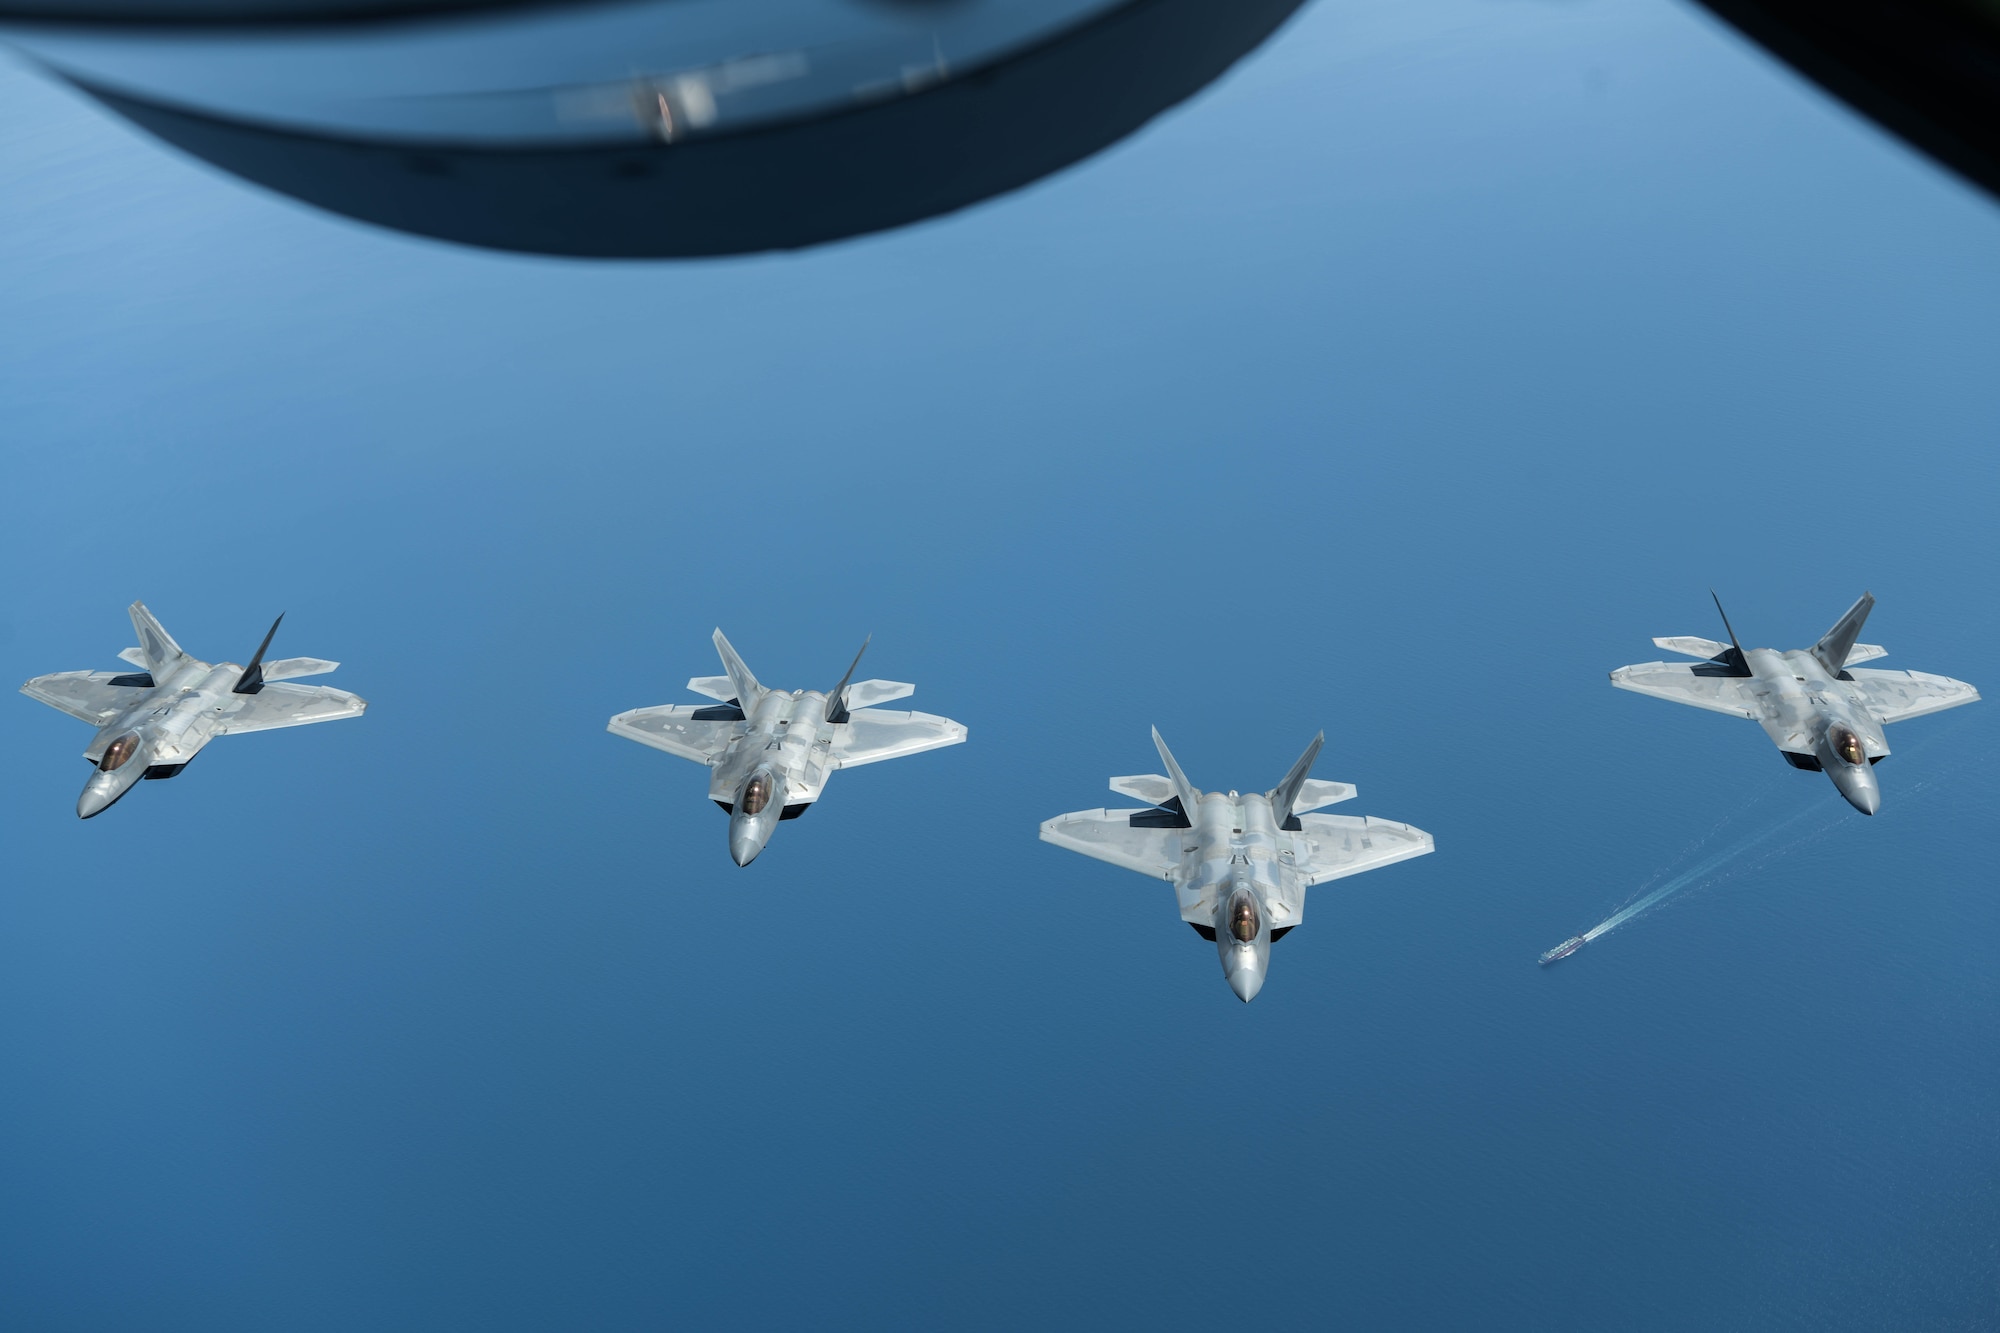 U.S. Air Force F-22 Raptors from the 199th Fighter Squadron, Joint Base Pearl Harbor-Hickam, Hawaii, fly in formation during a bilateral operation, April 1, 2021. The 199th Fighter Squadron deployed to Marine Corps Air Station Iwakuni, Japan, to conduct integrated training with Marine and Naval forces as part of U.S. Indo-Pacific Command’s dynamic force employment concept. (U.S. Air Force photo by Senior Airman Rebeckah Medeiros)